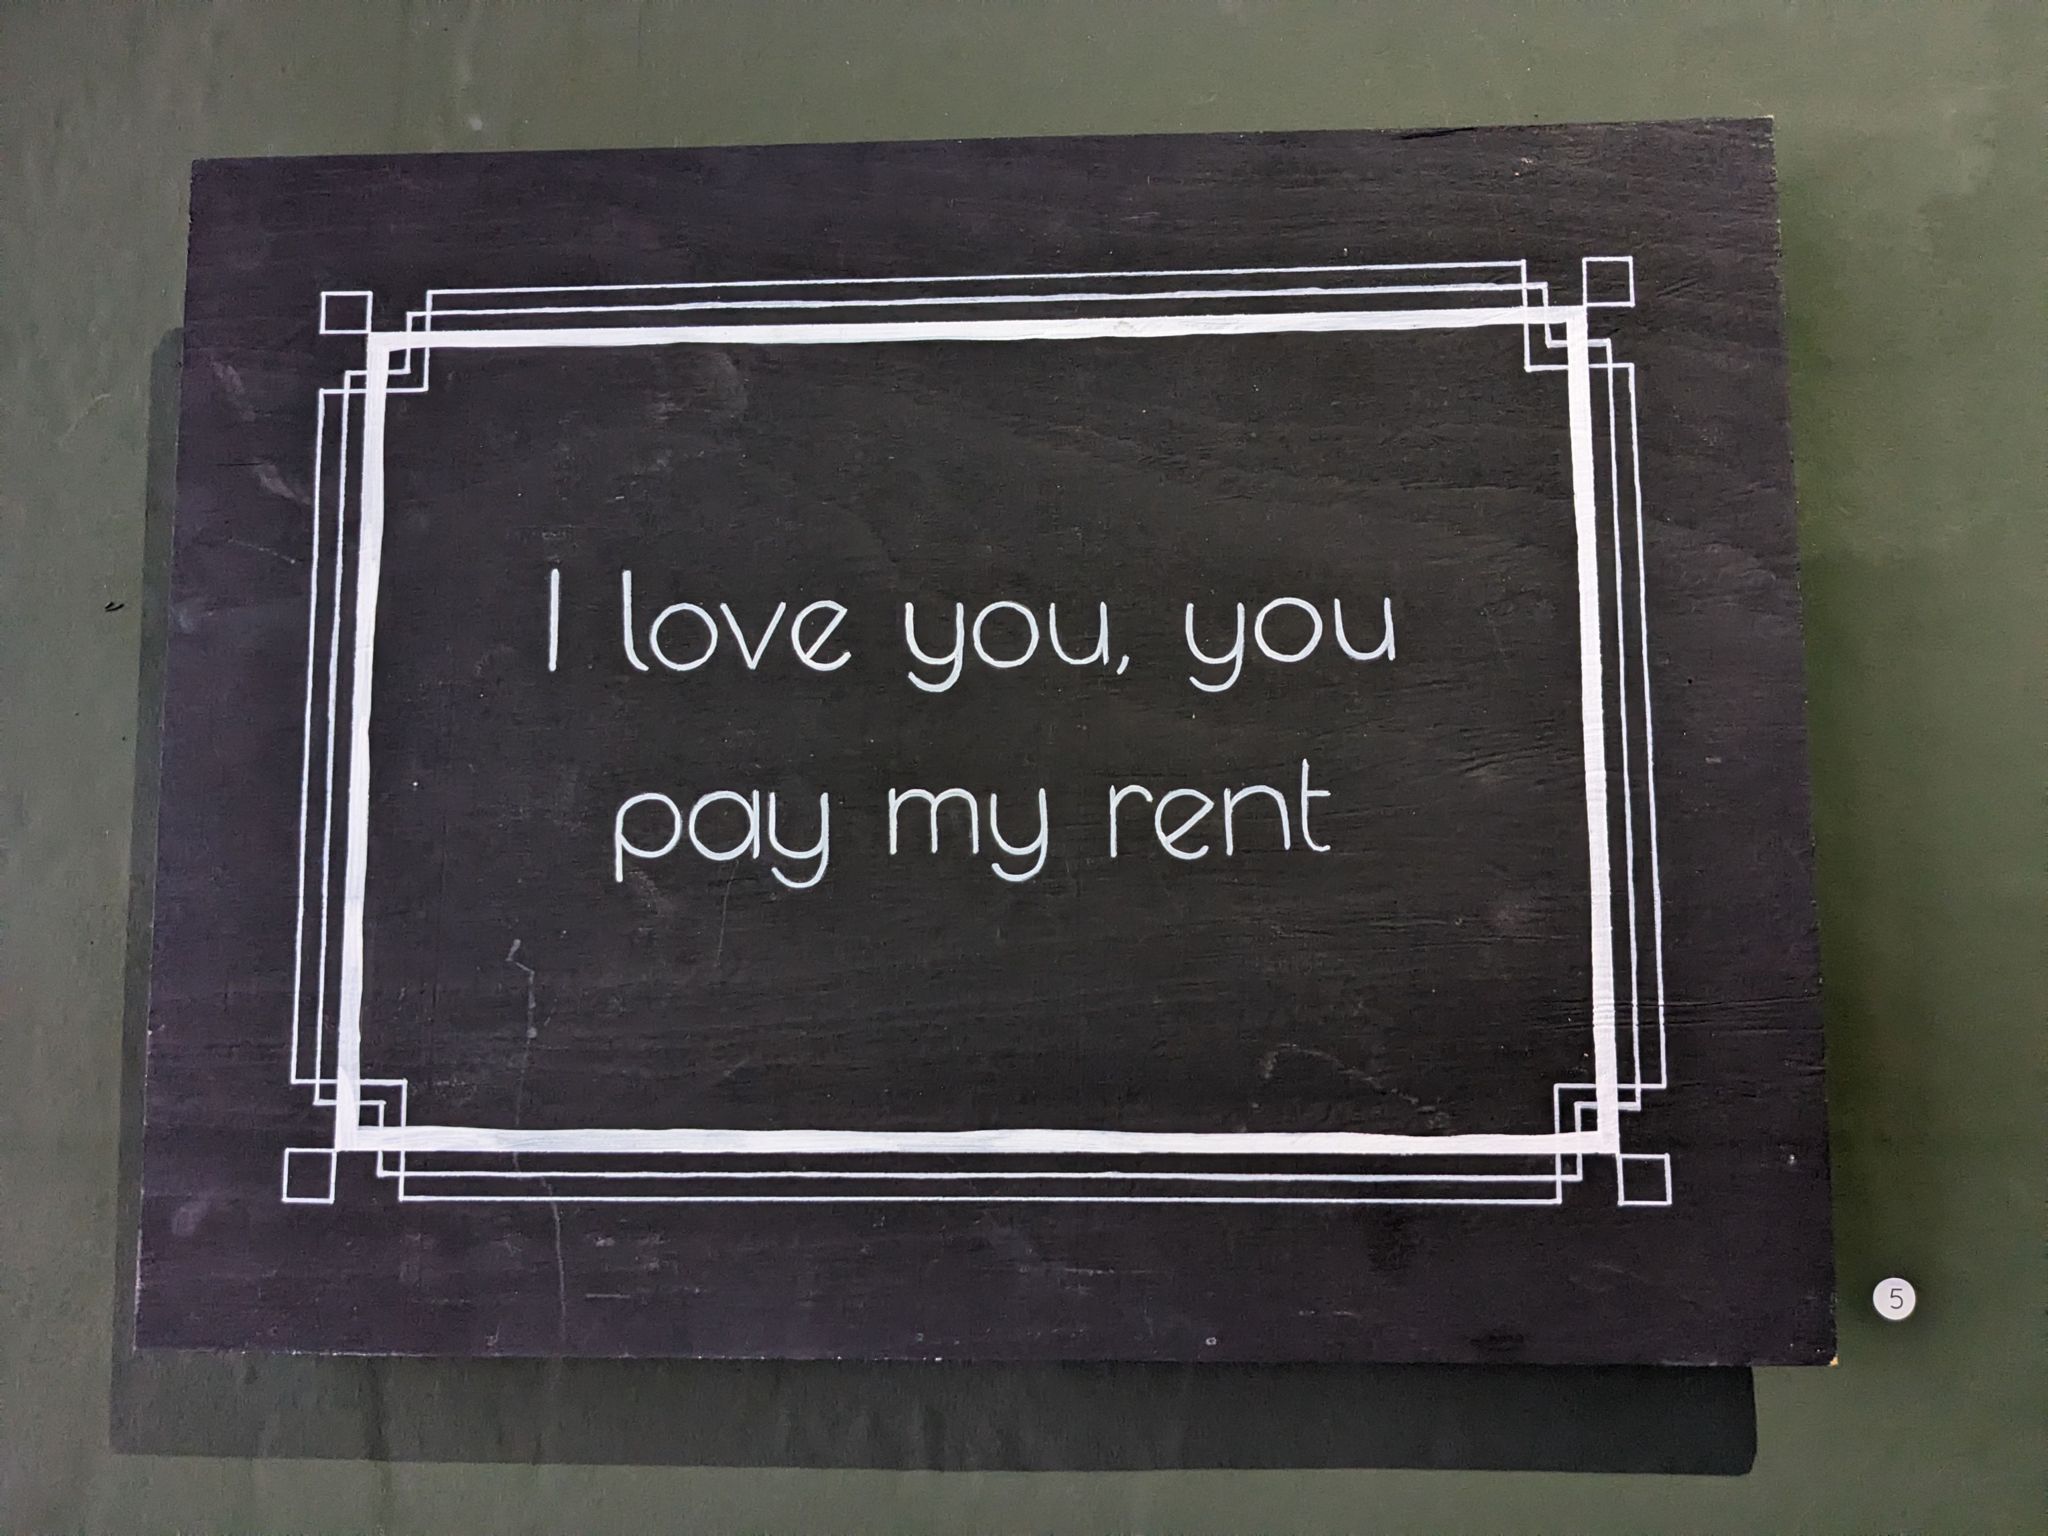 a sign reading "I love you, you pay my rent"